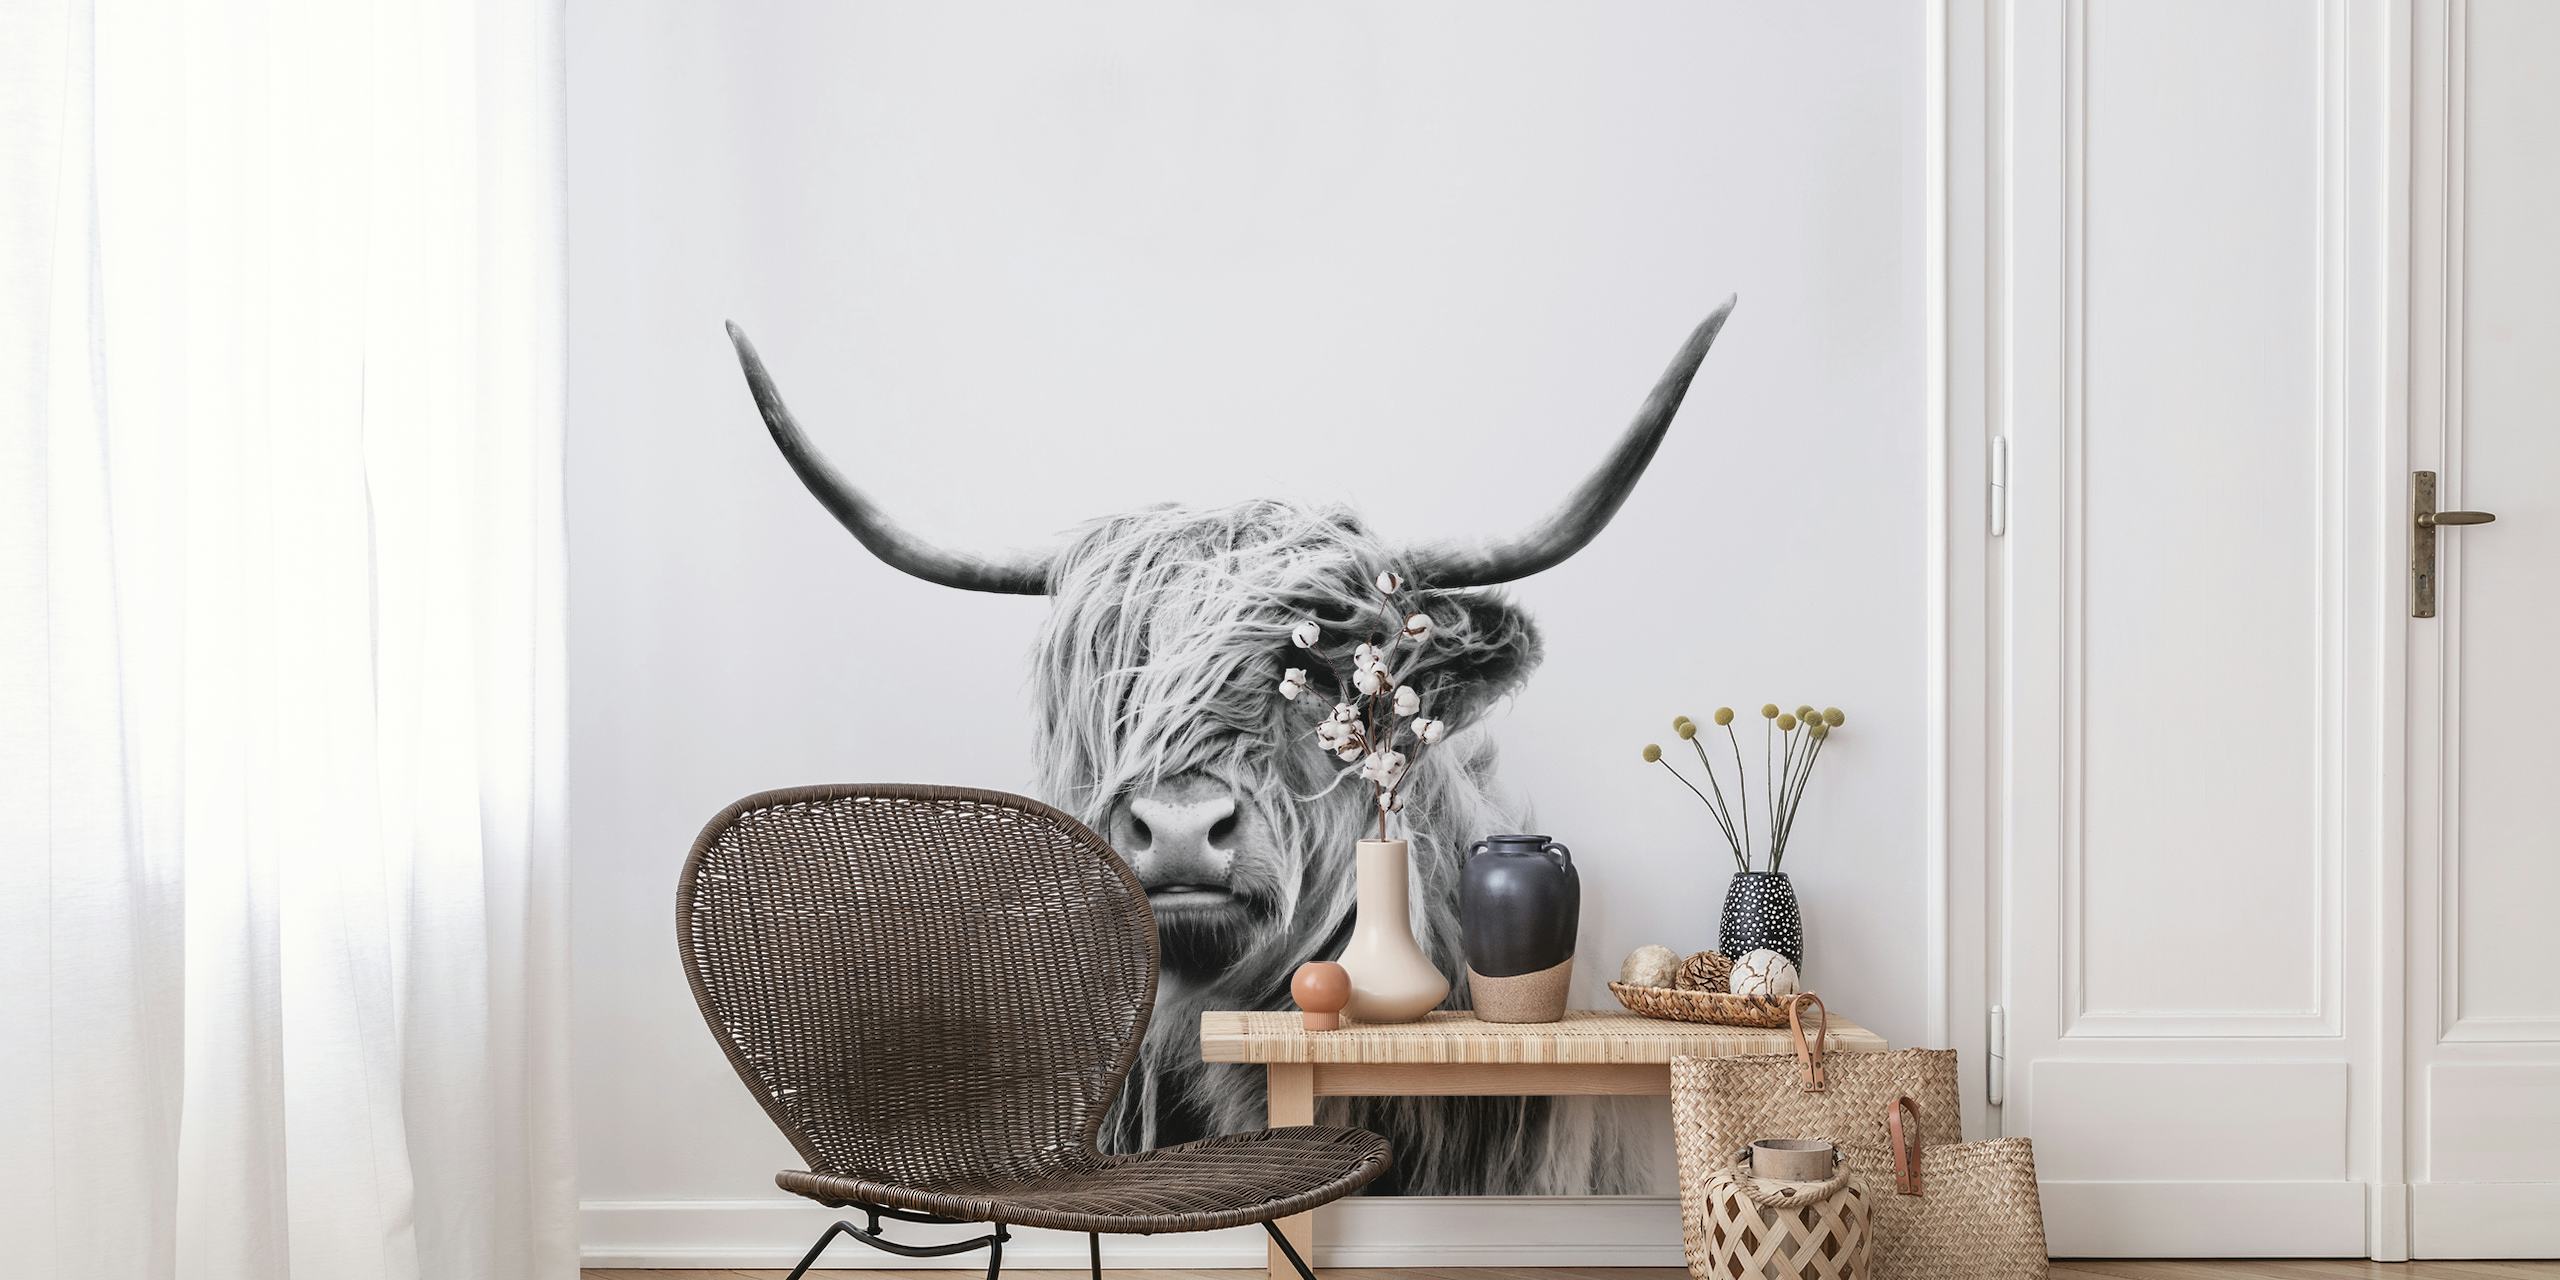 Black and white wall mural of a Highland Cow with shaggy fur and long horns